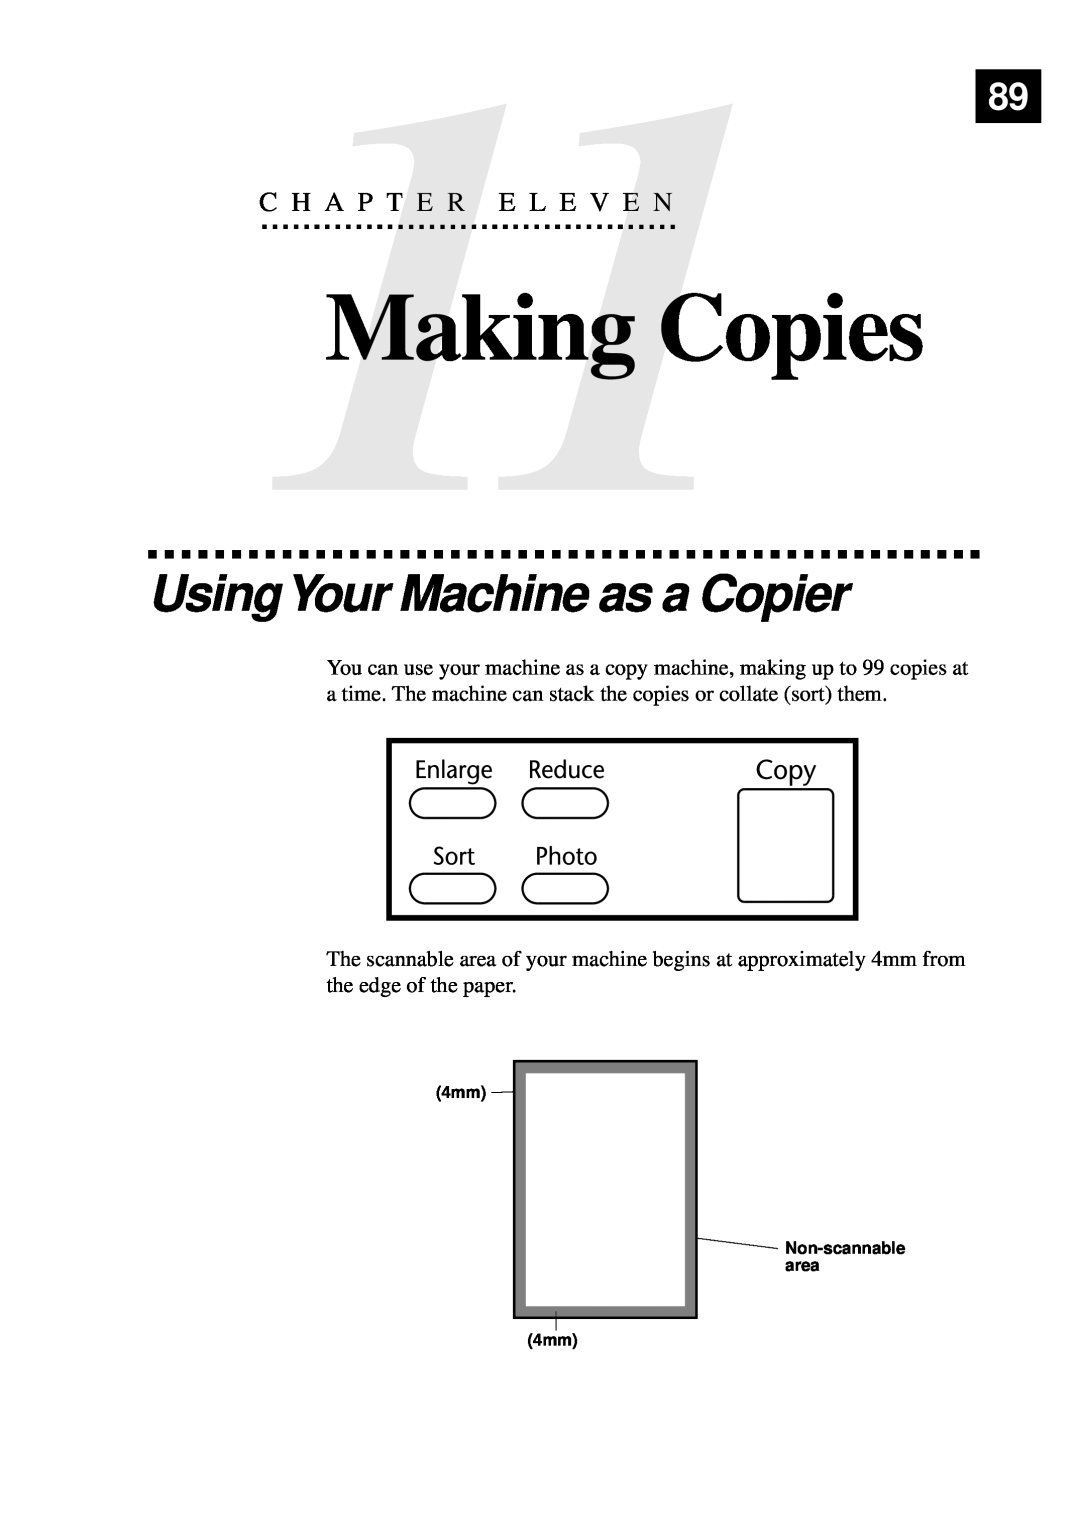 Brother MFC-9650, FAX-8350P owner manual Making Copies, UsingYour Machine as a Copier, C11H A P T E R E L E V E N89 